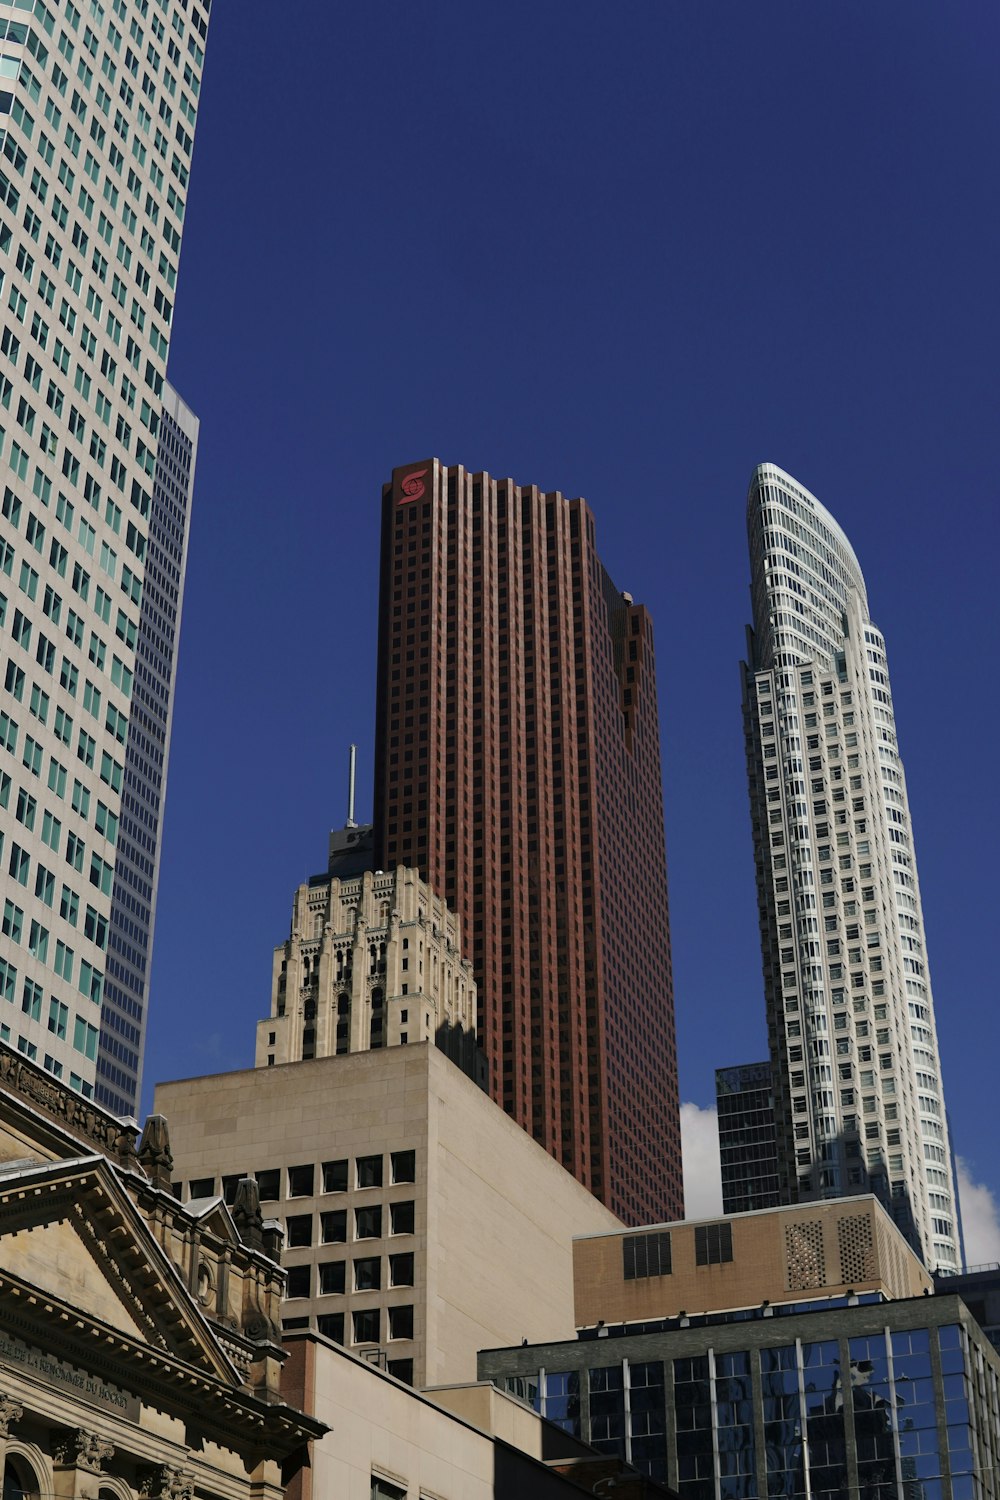 a group of tall buildings